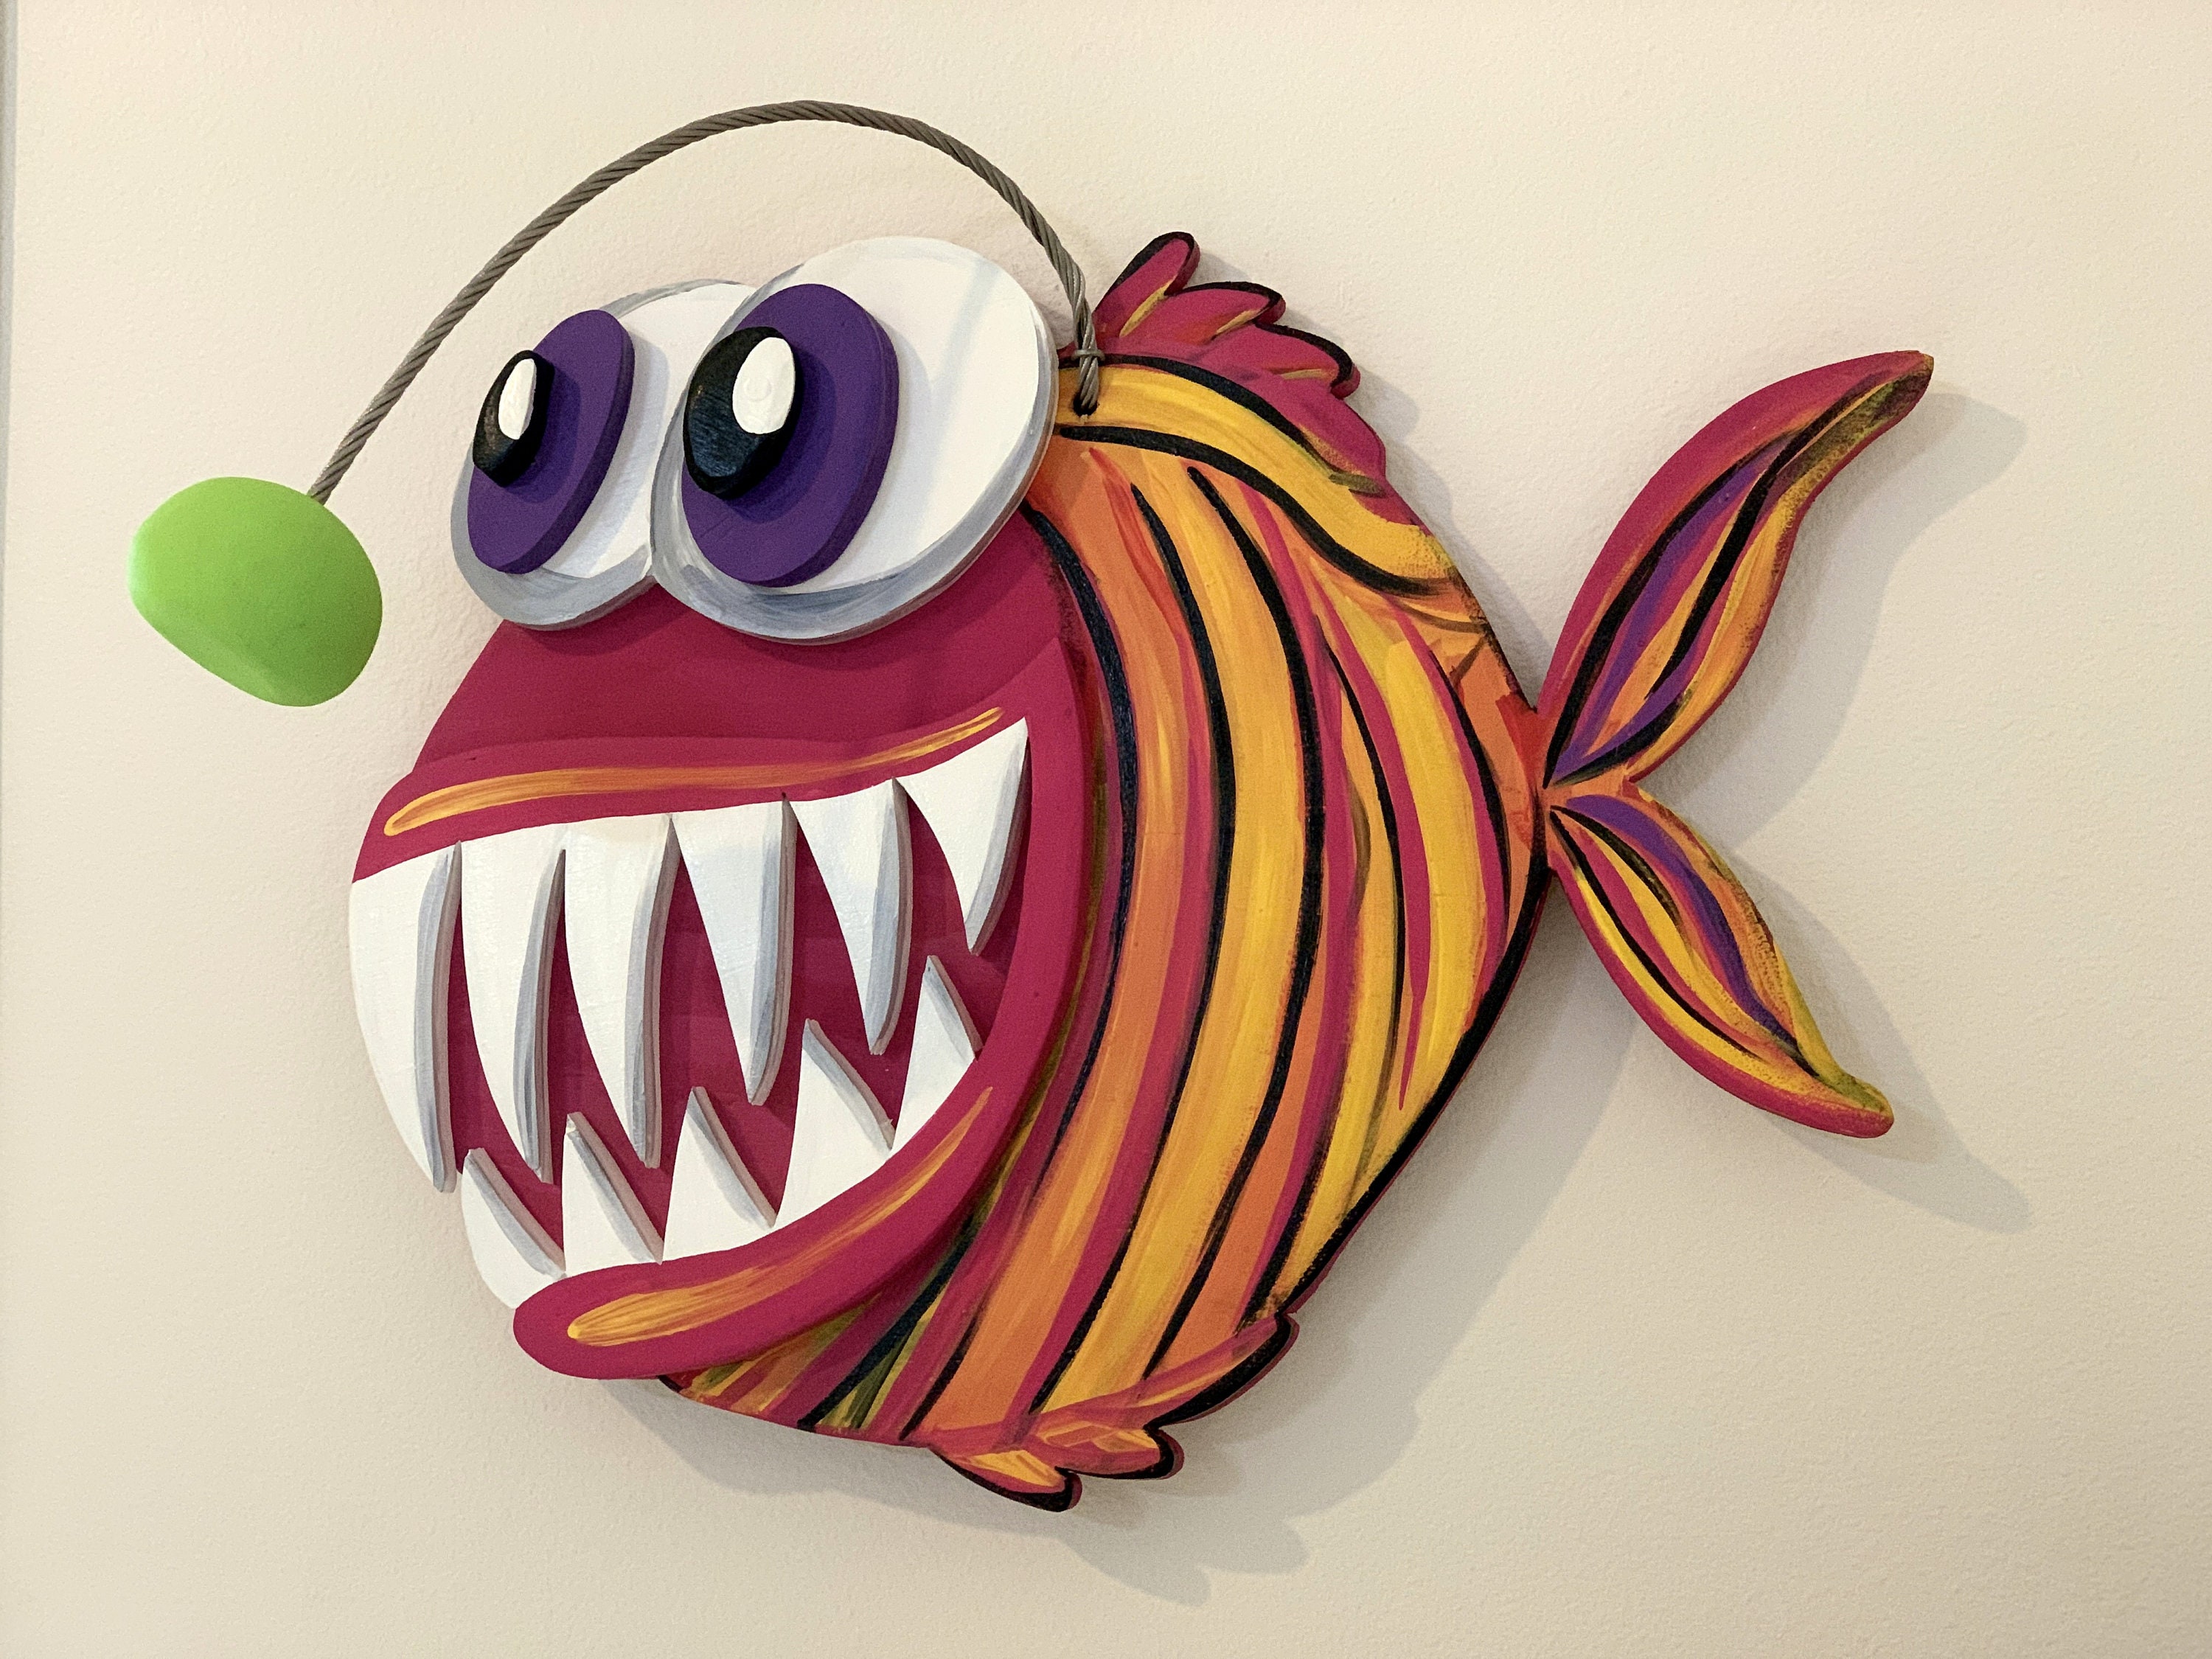 Angler Fish Wall Art Wood. Funny Fish Decor for Home. Large Wooden